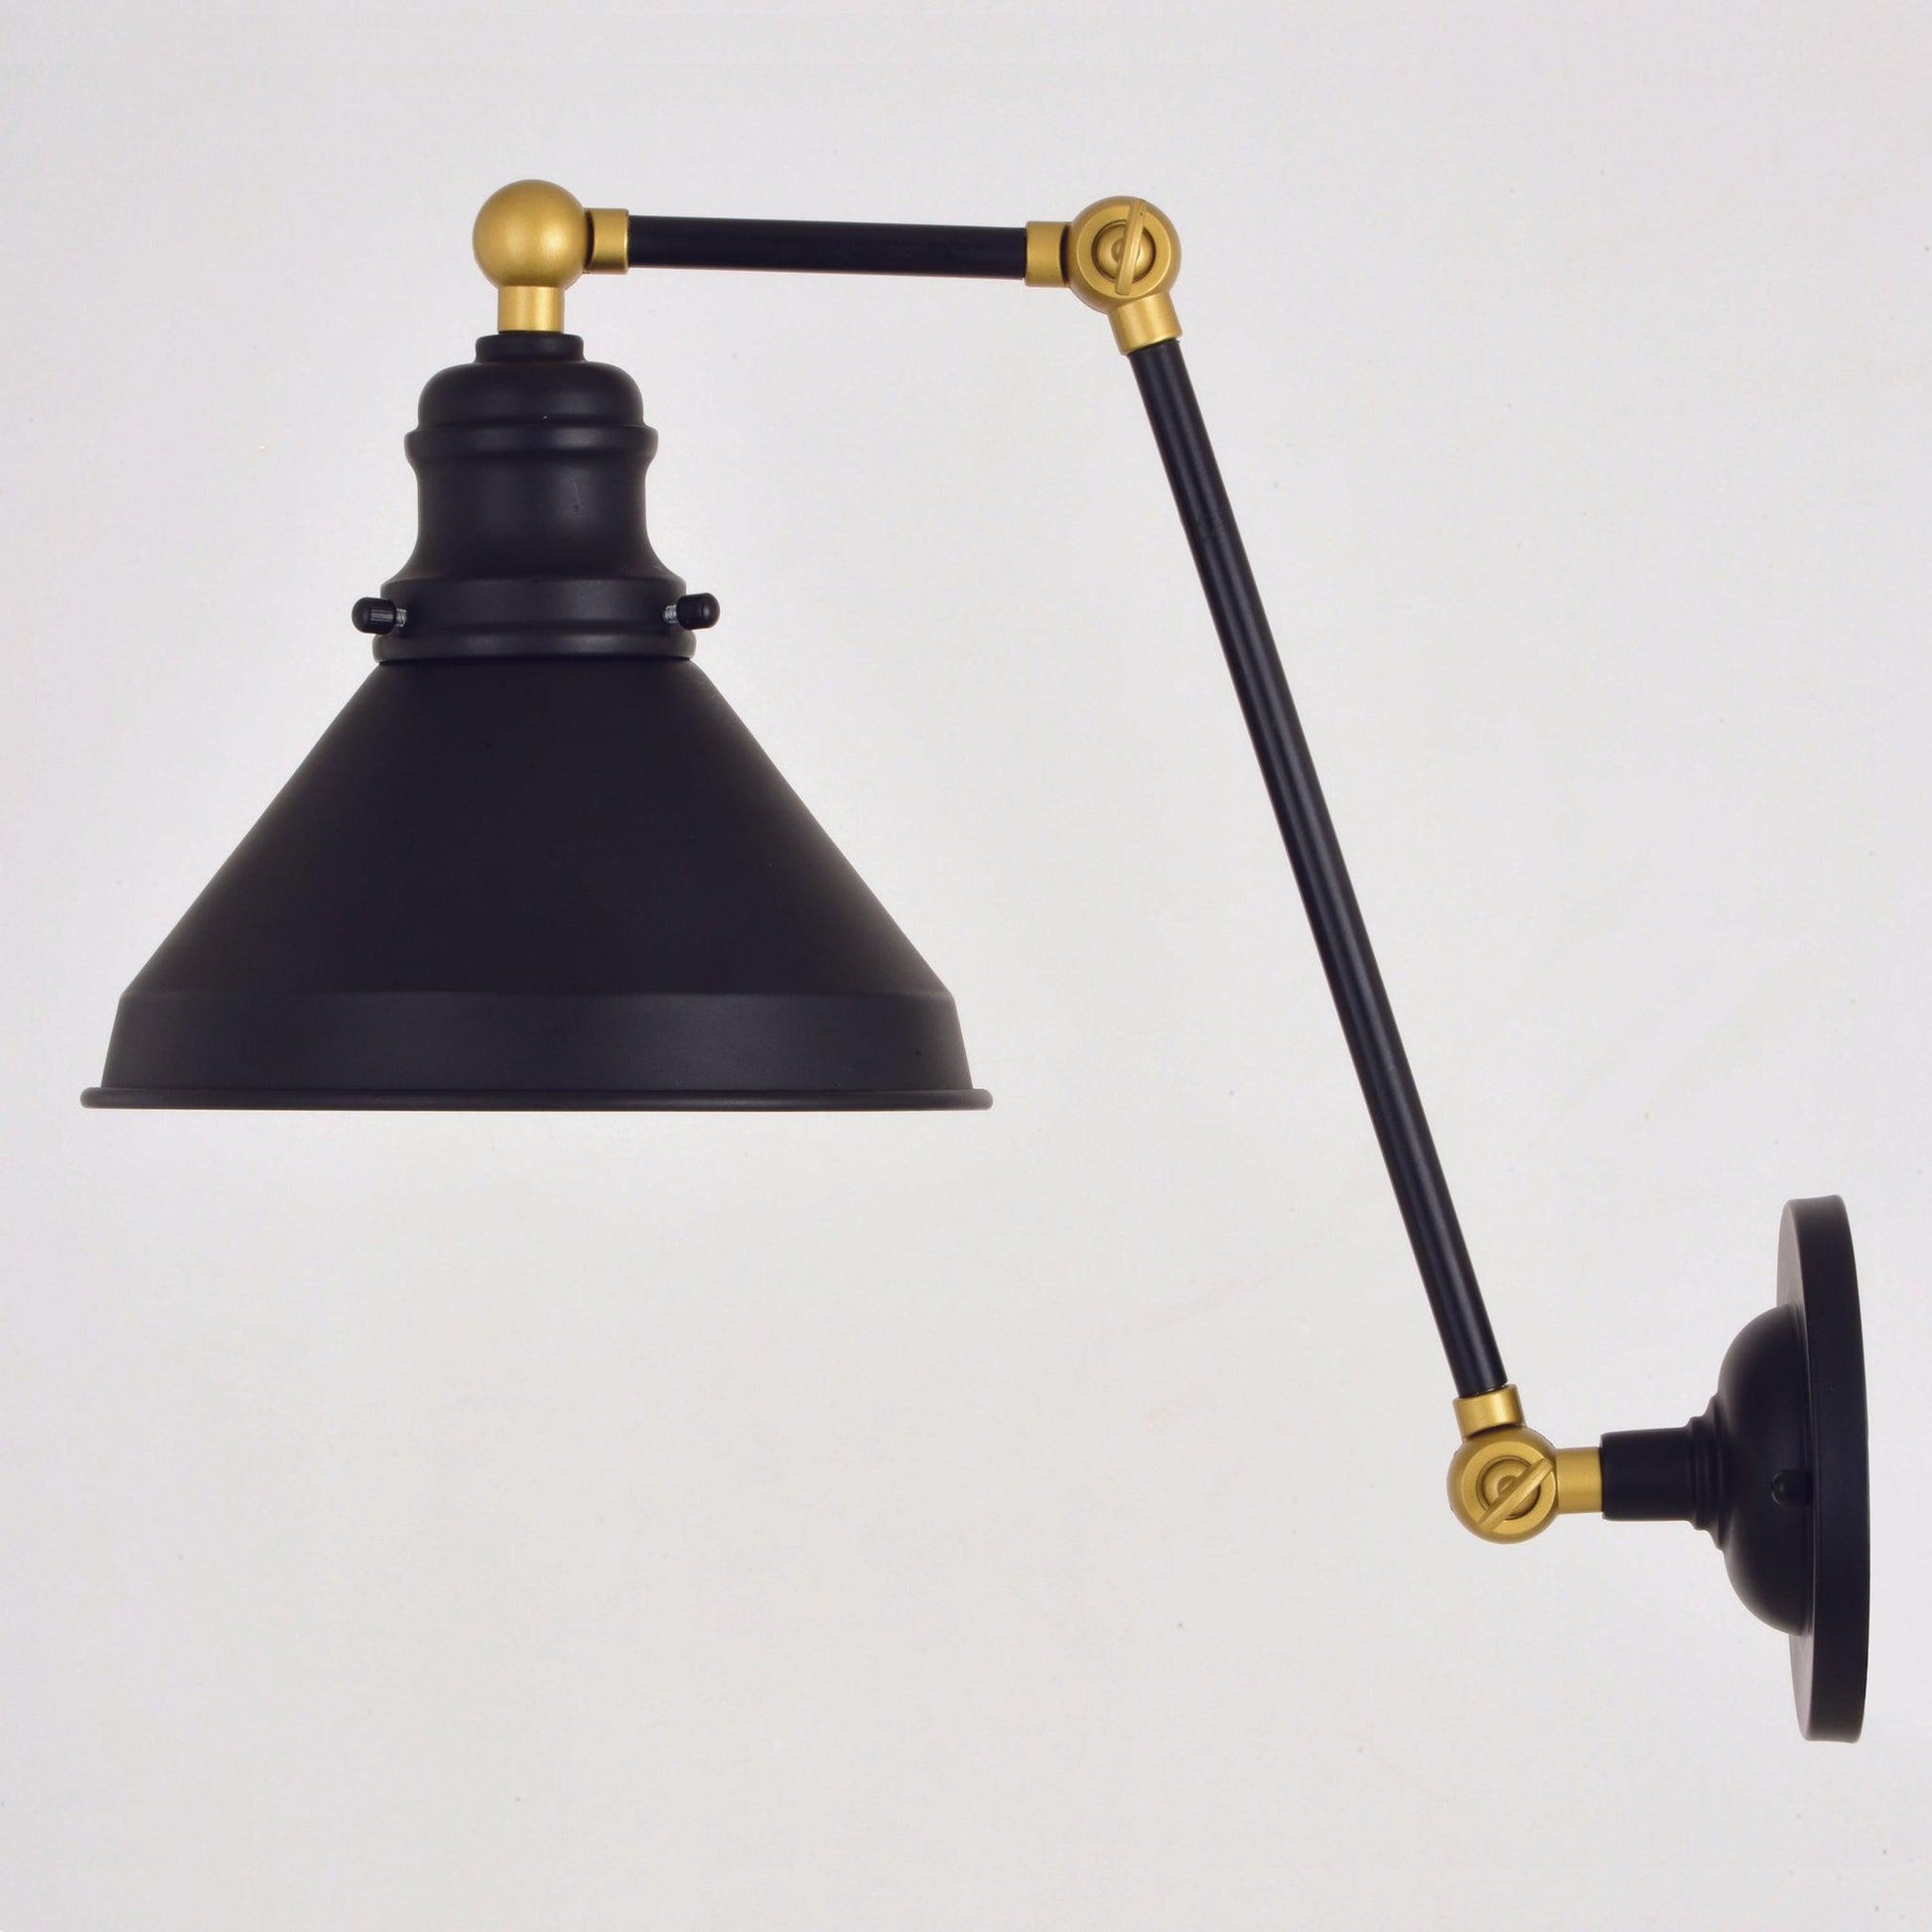 Vaxcel Alexis 8" 1-Light Oil Rubbed Bronze and Satin Gold Adjustable Swing Arm Wall Light With Metal Shade